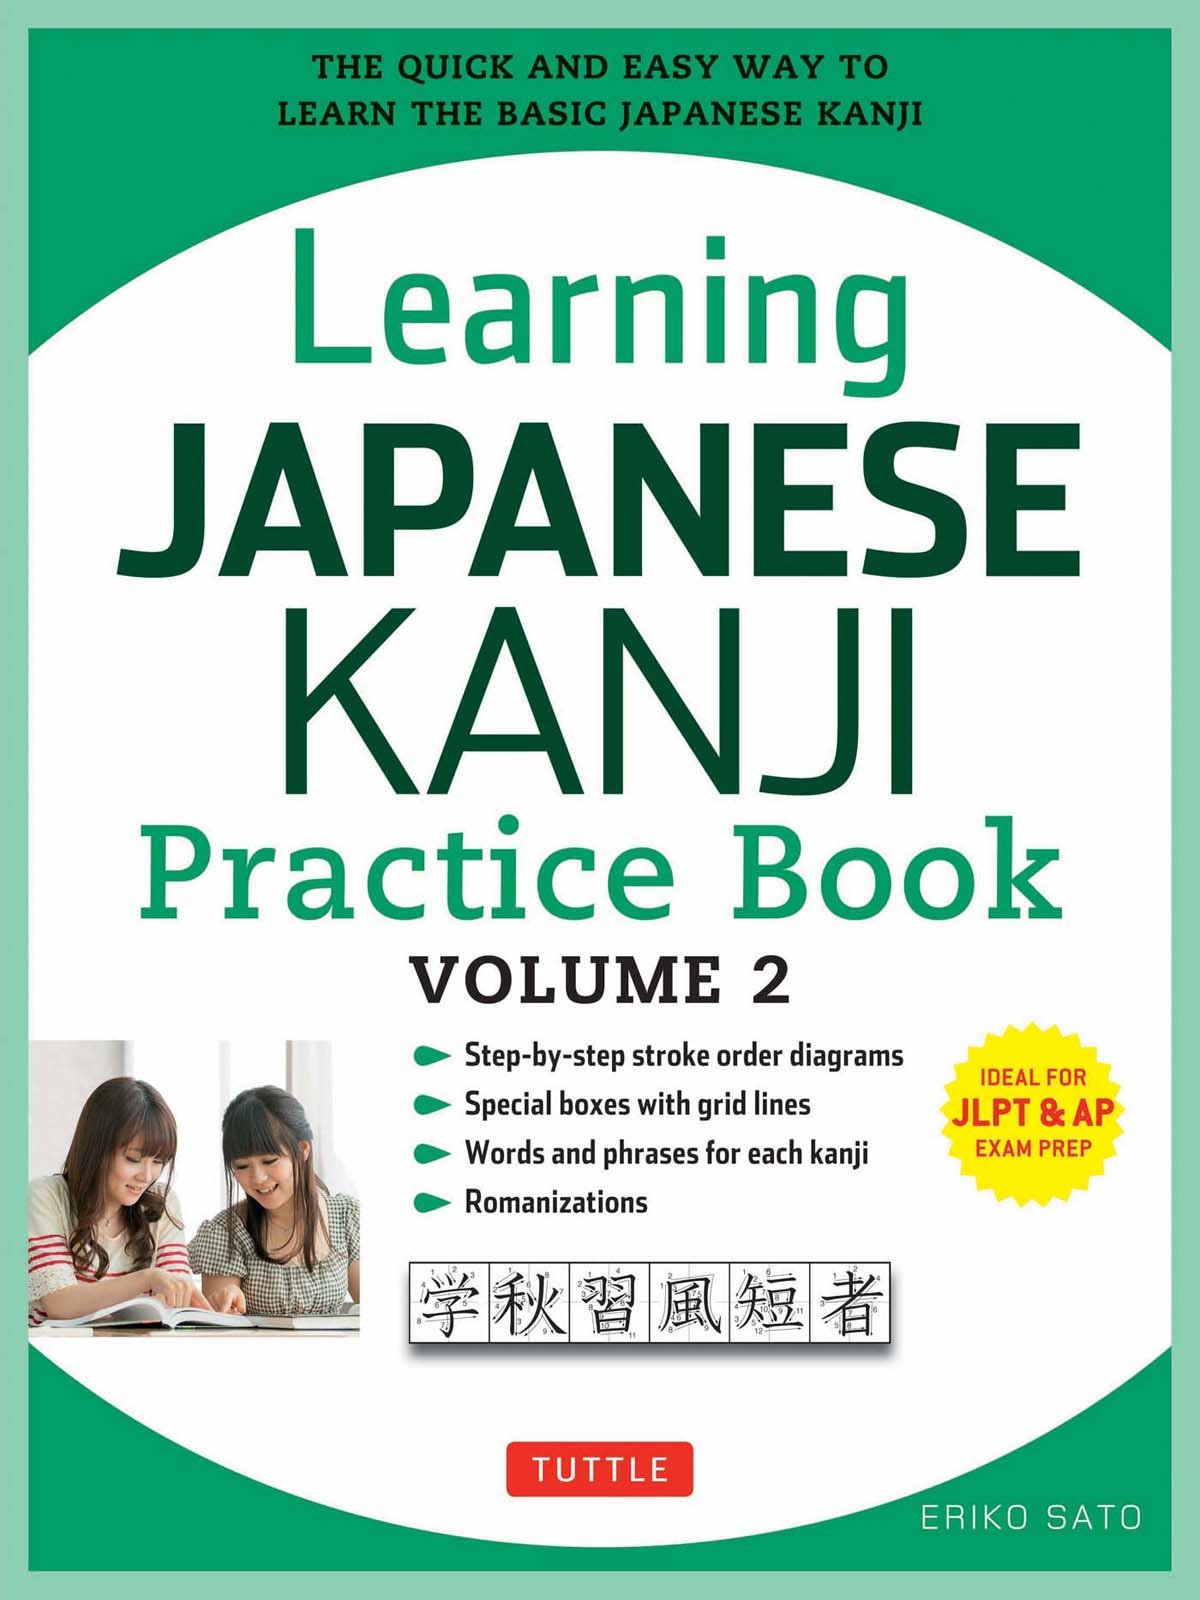 Learning Japanese Kanji Practice Book Volume 2 Jlpt Level N4 And Ap Exam The Quick And Easy Way